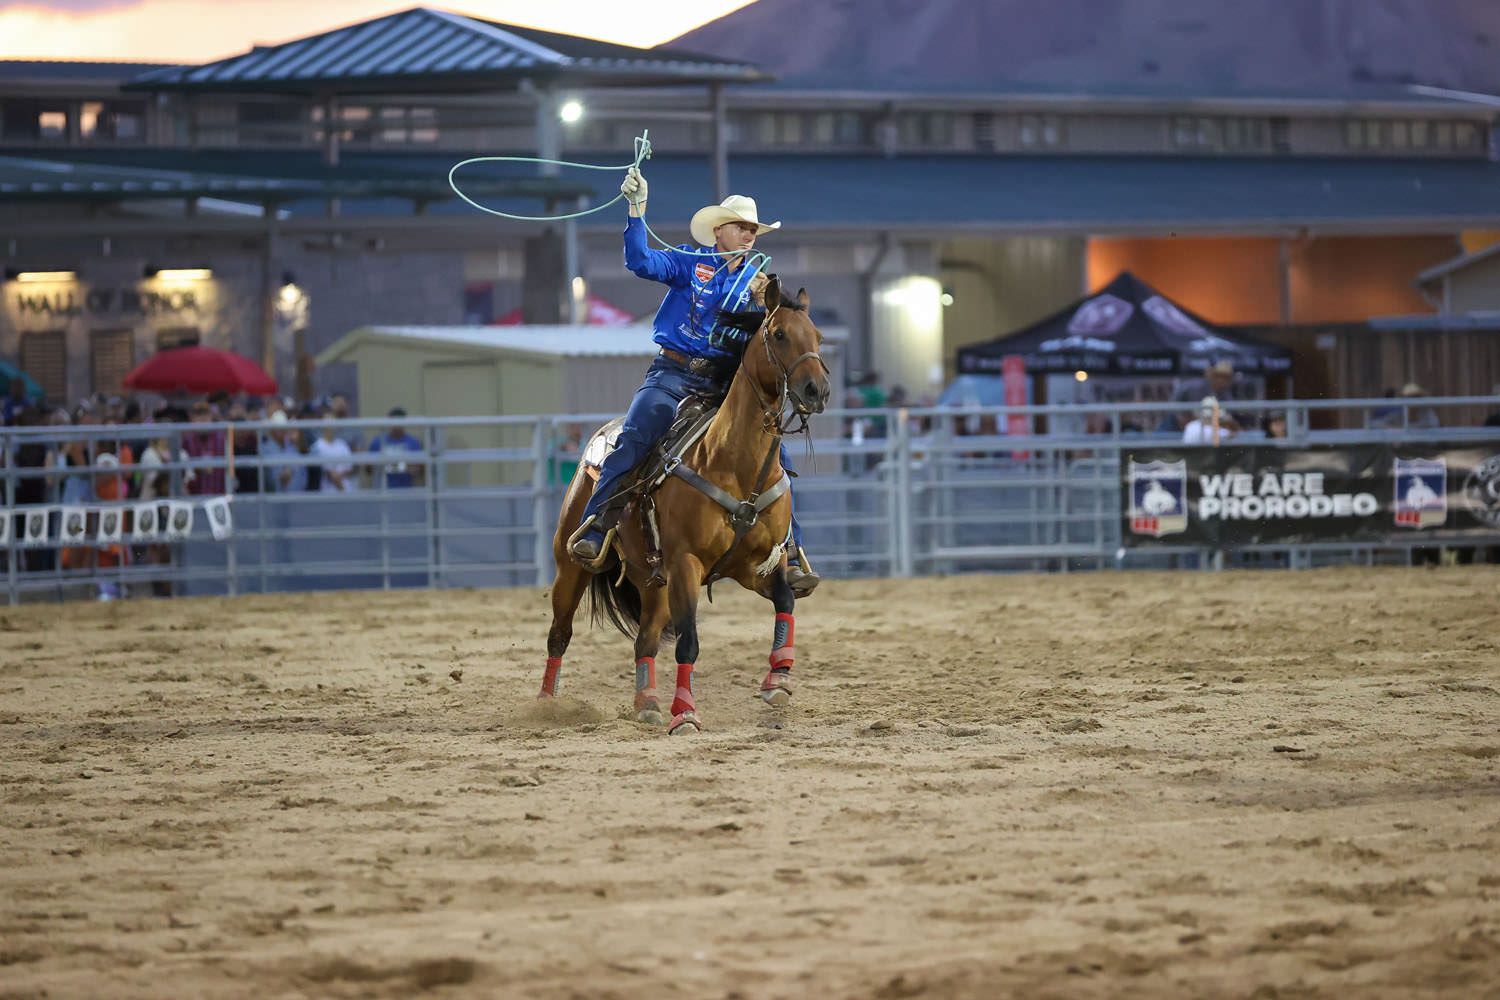 Roping Rodeo Event